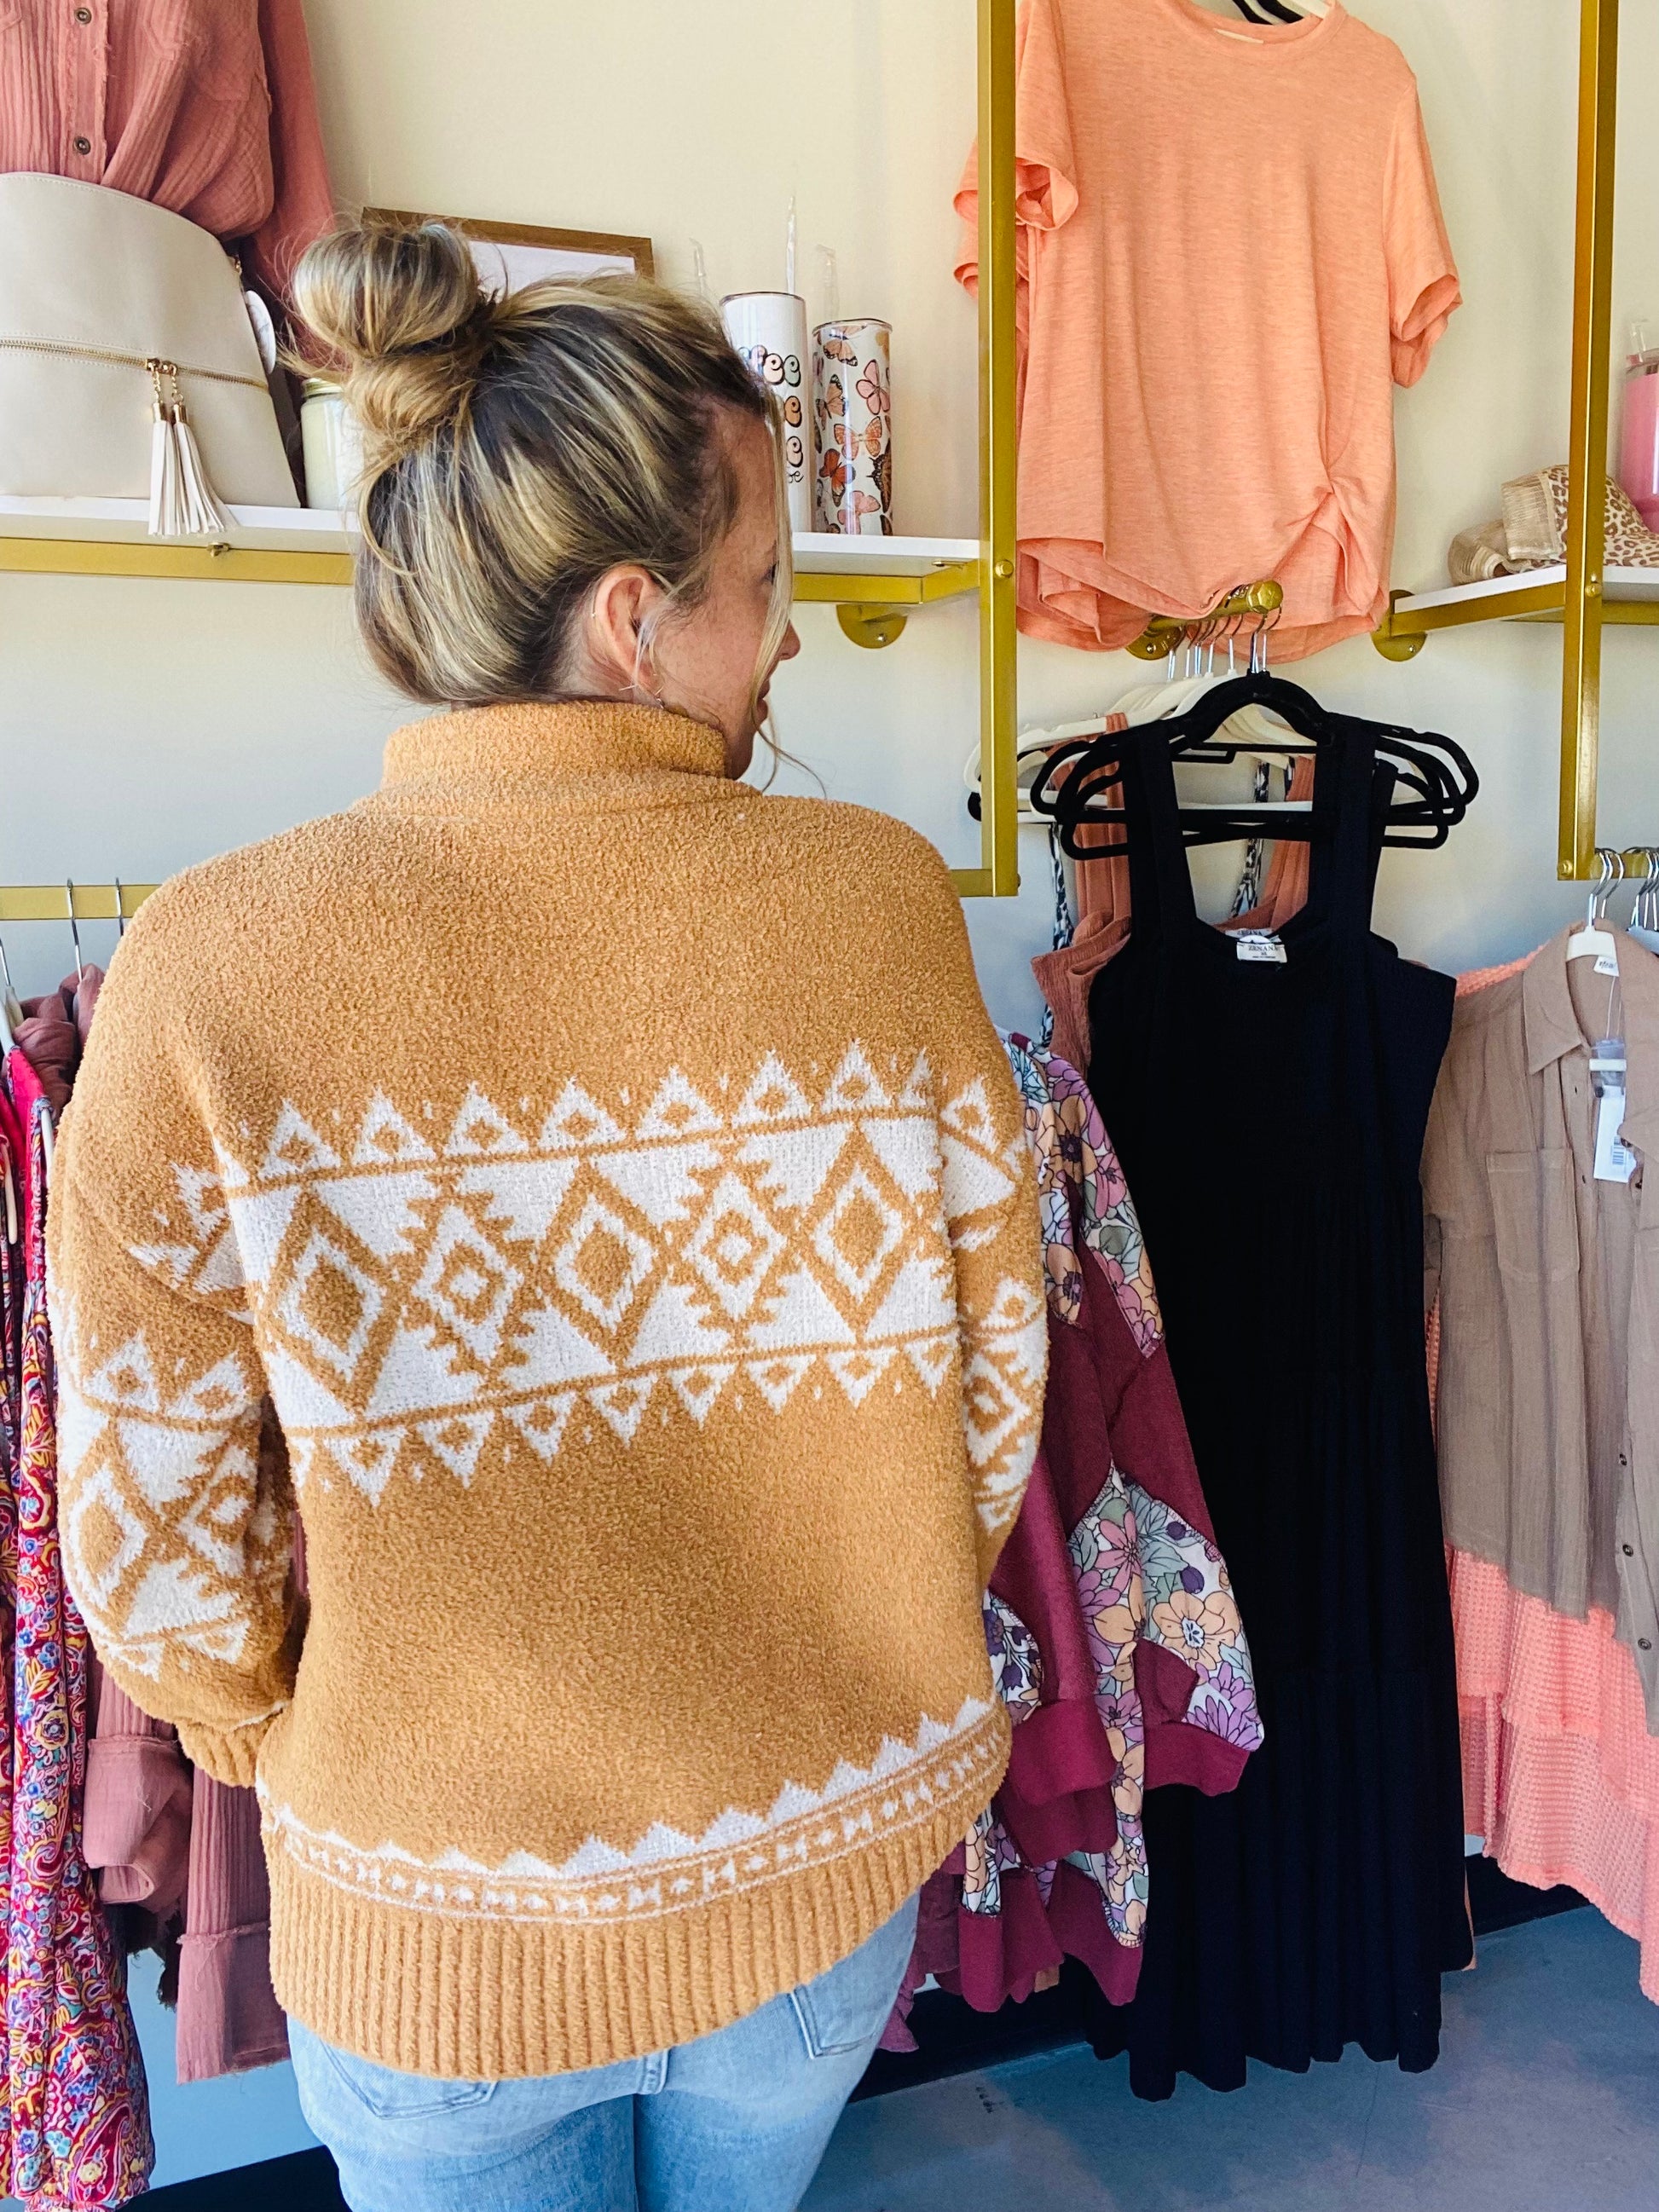 This classic Aztec Tan Zip Pullover boasts a buttery-soft material and a timeless aztec pattern, perfect for adding a cozy touch to your winter wardrobe. Its zip-up collar gives you the option of extra protection on the coldest days.